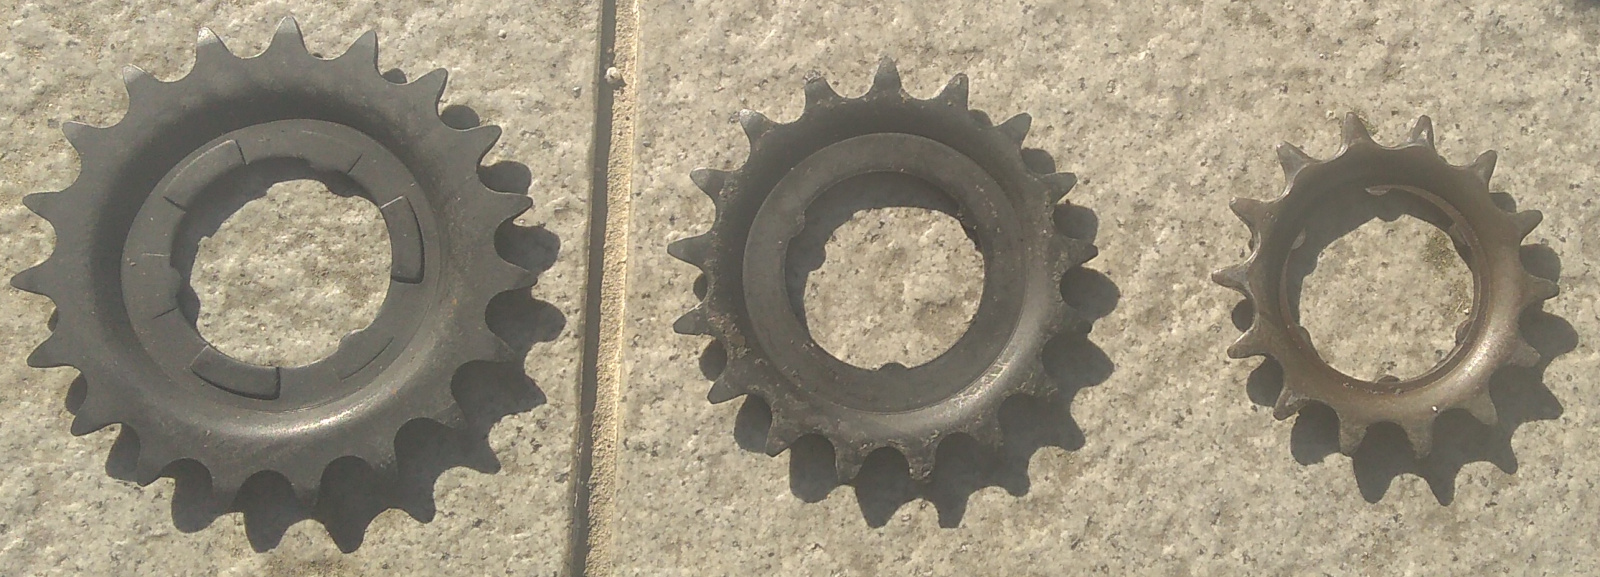 Three sprockets lined up on a tile background. From left to right the sizes are: 19-teeth; 17-teeth; and 14-teeth.